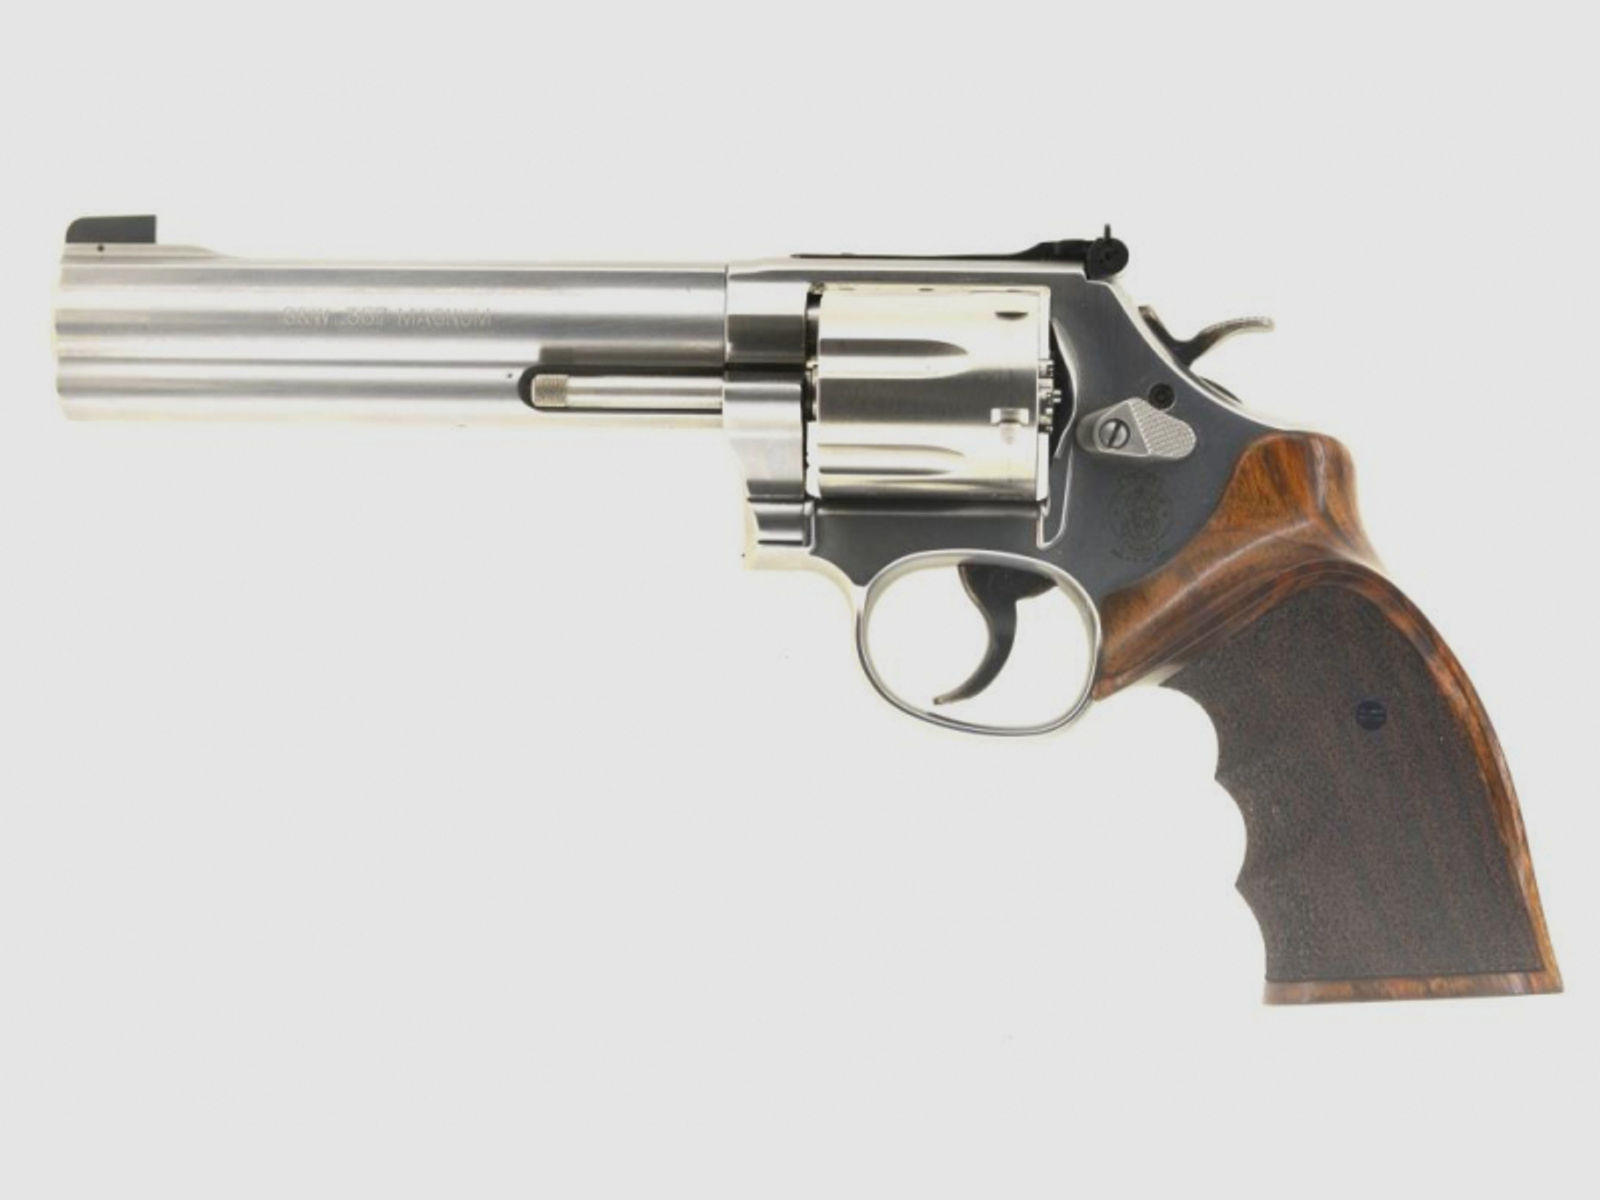 Revolver Smith & Wesson S&W Mod. 686-6 Target International Kal. .357 Magnum Bj. 2000, 6-Zoll, 1a!!!